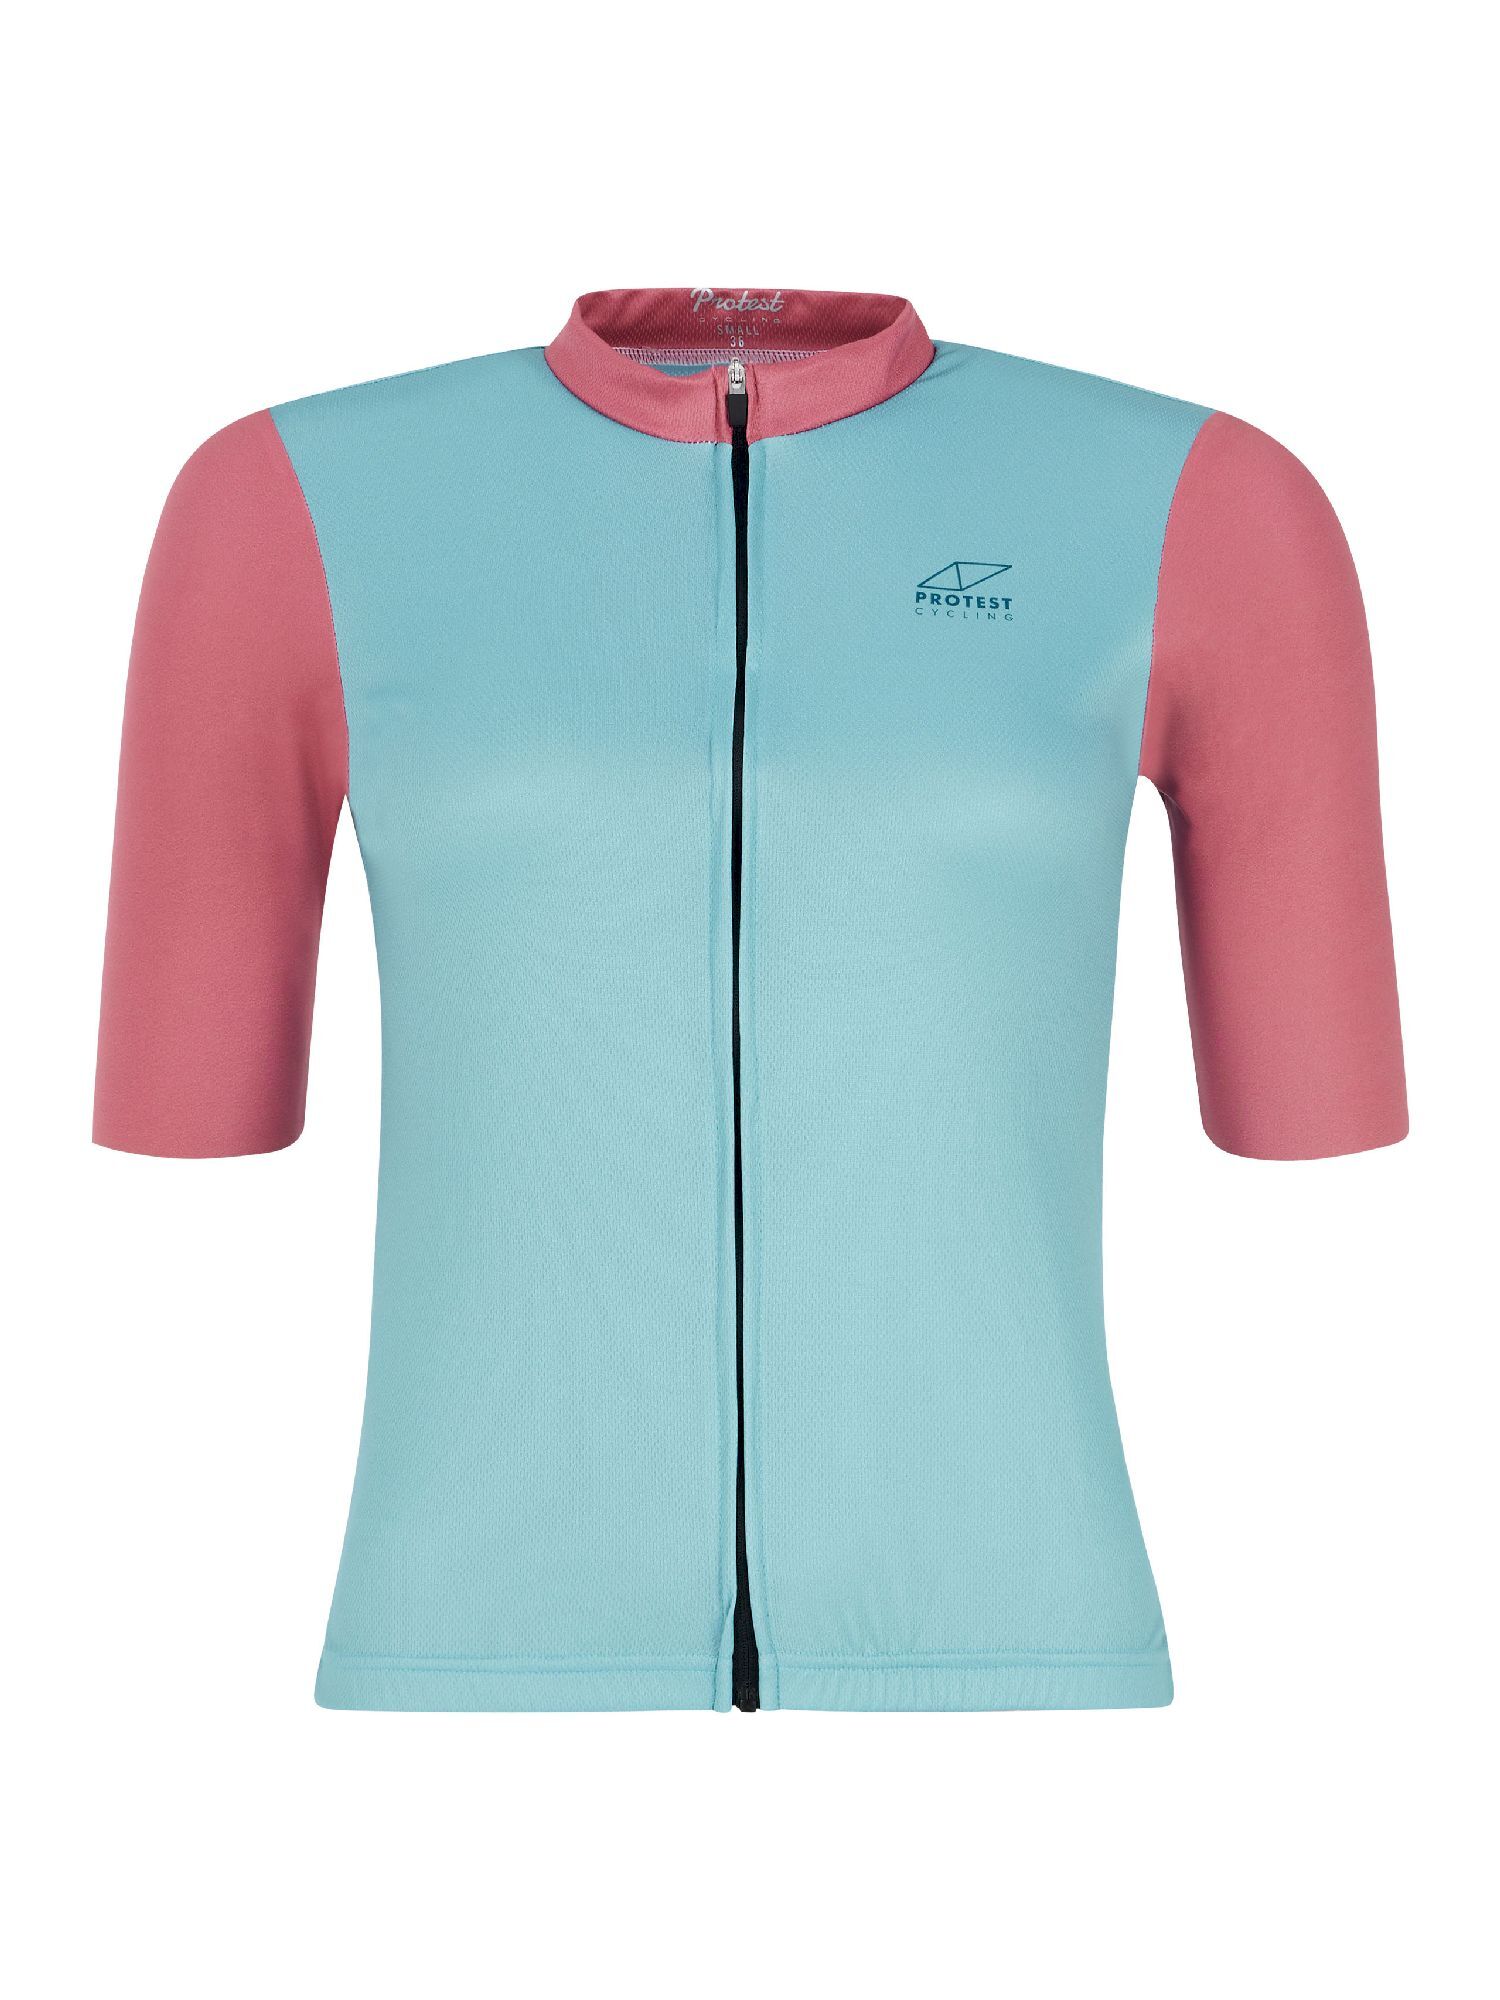 Protest Prtadieu - Maillot ciclismo - Mujer | Hardloop